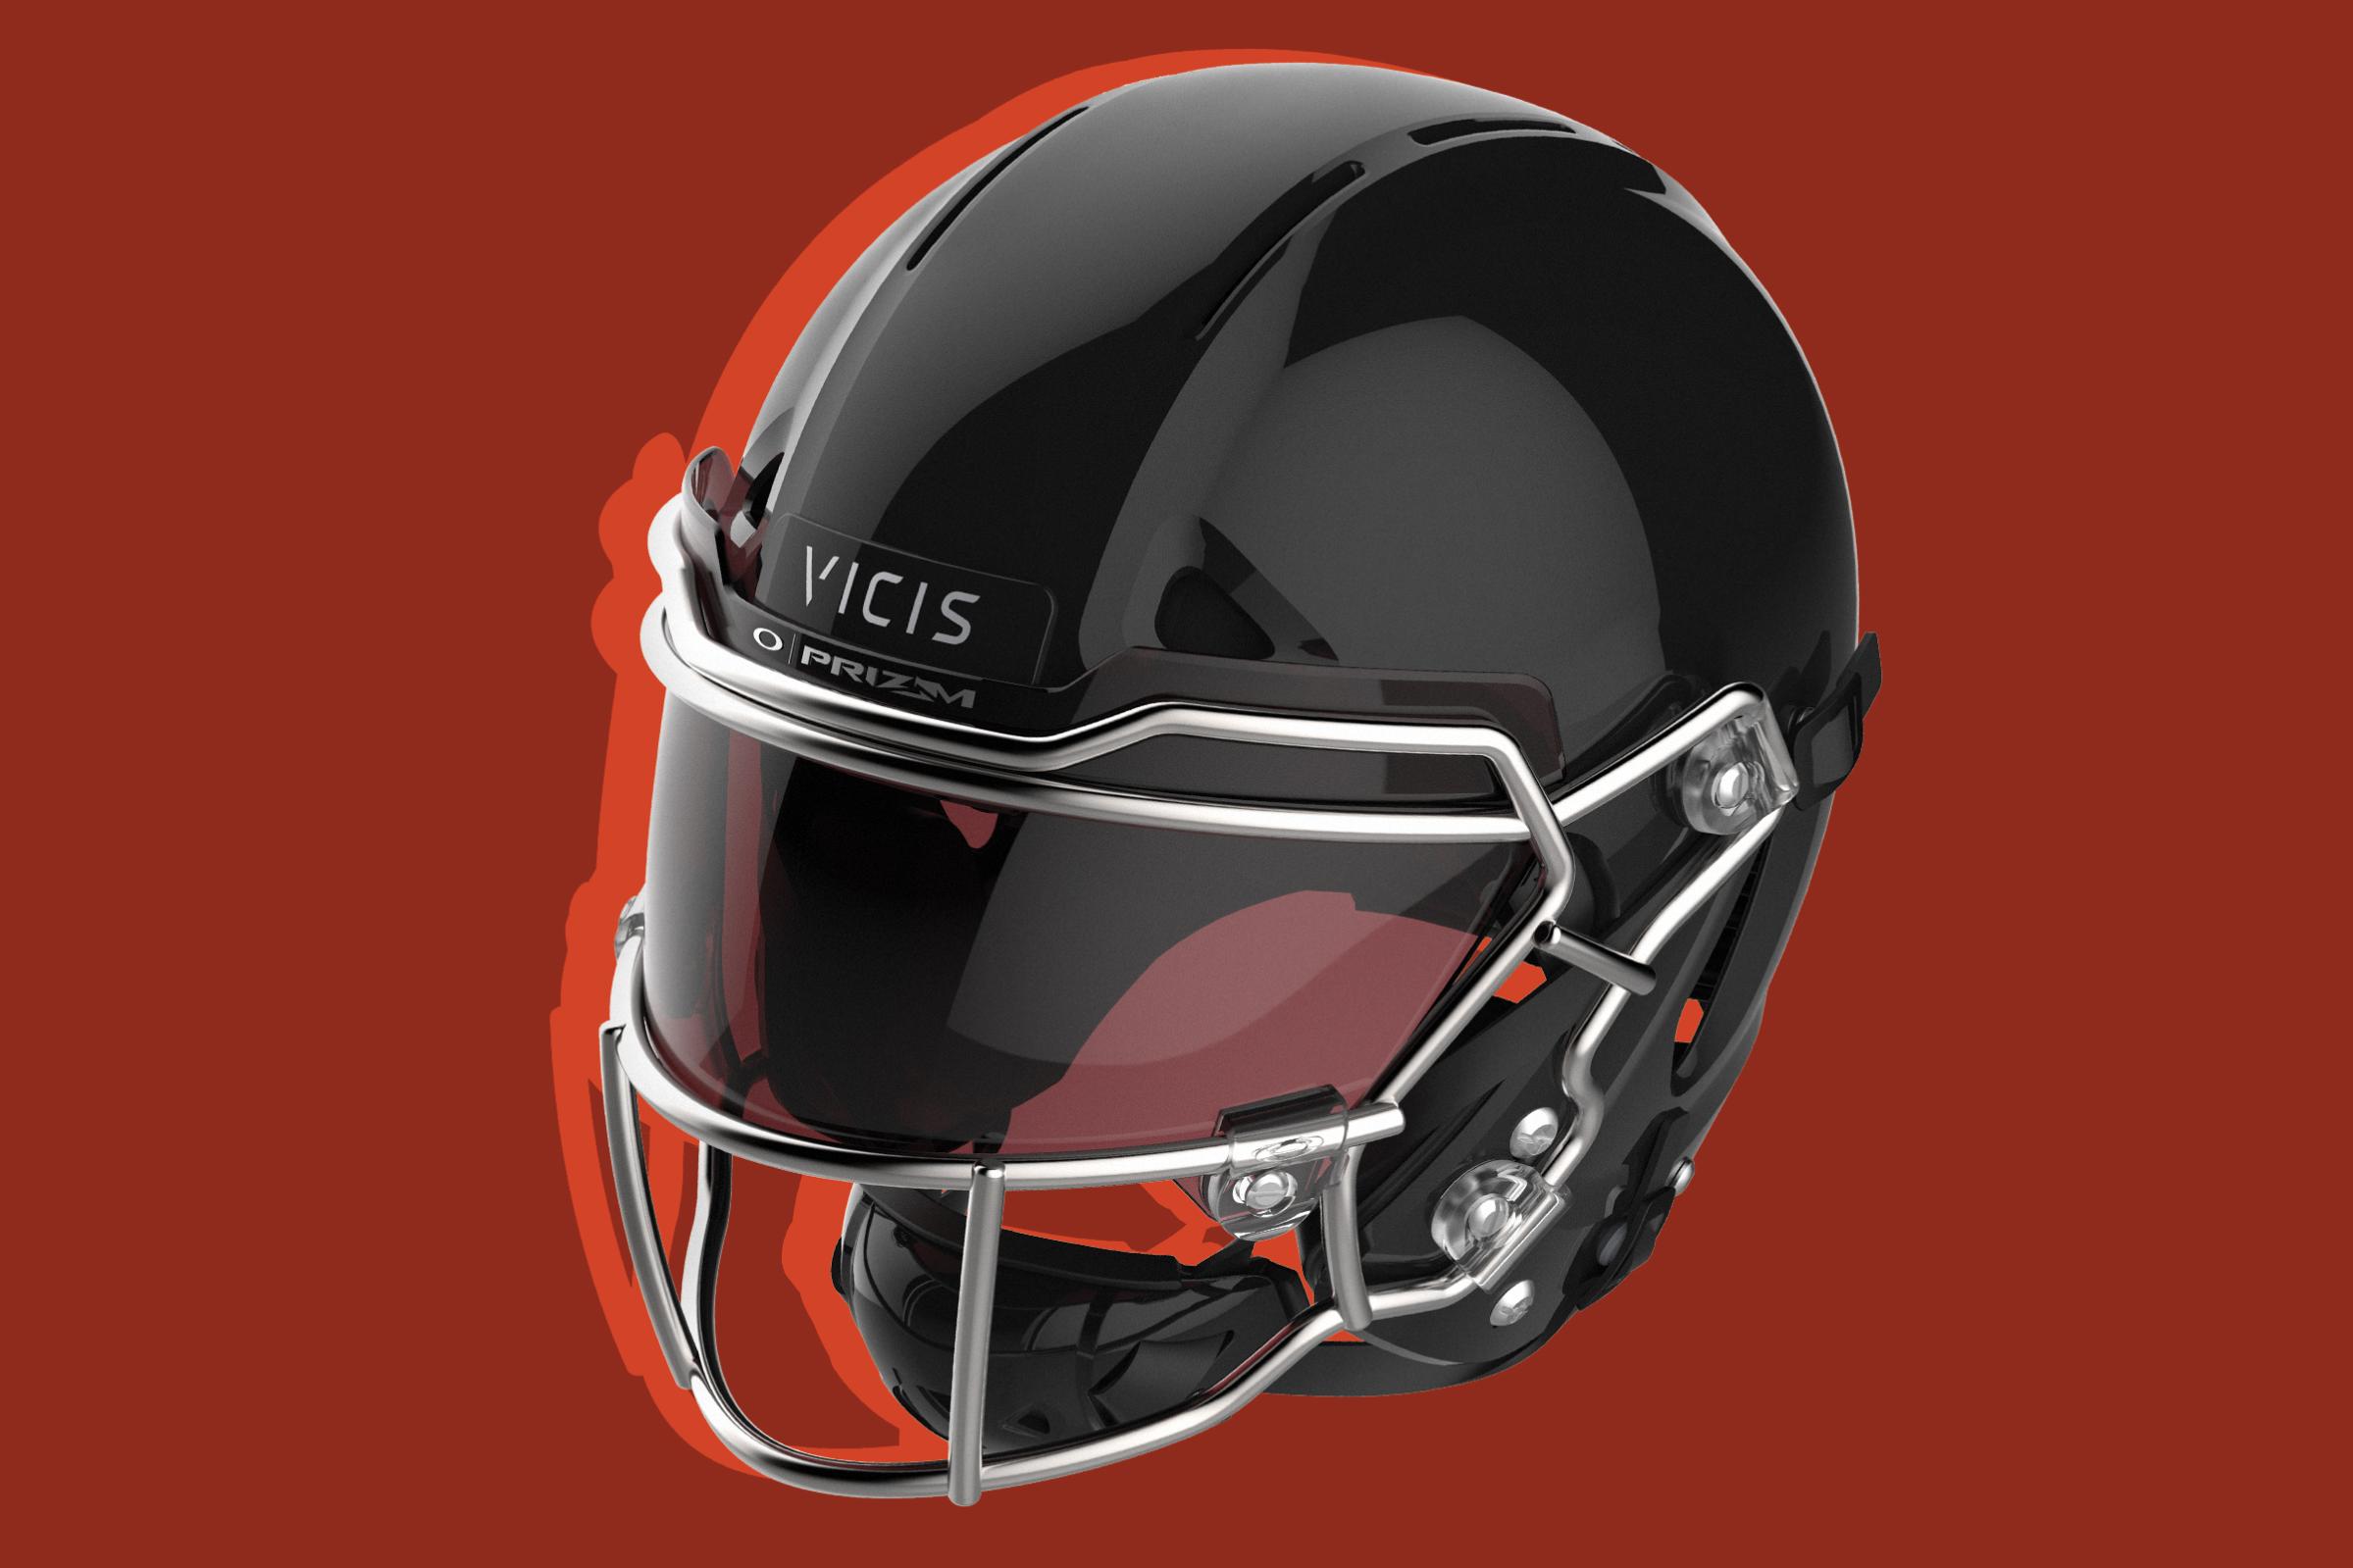 The VICIS Zero1 is one of the best inventions of 2017